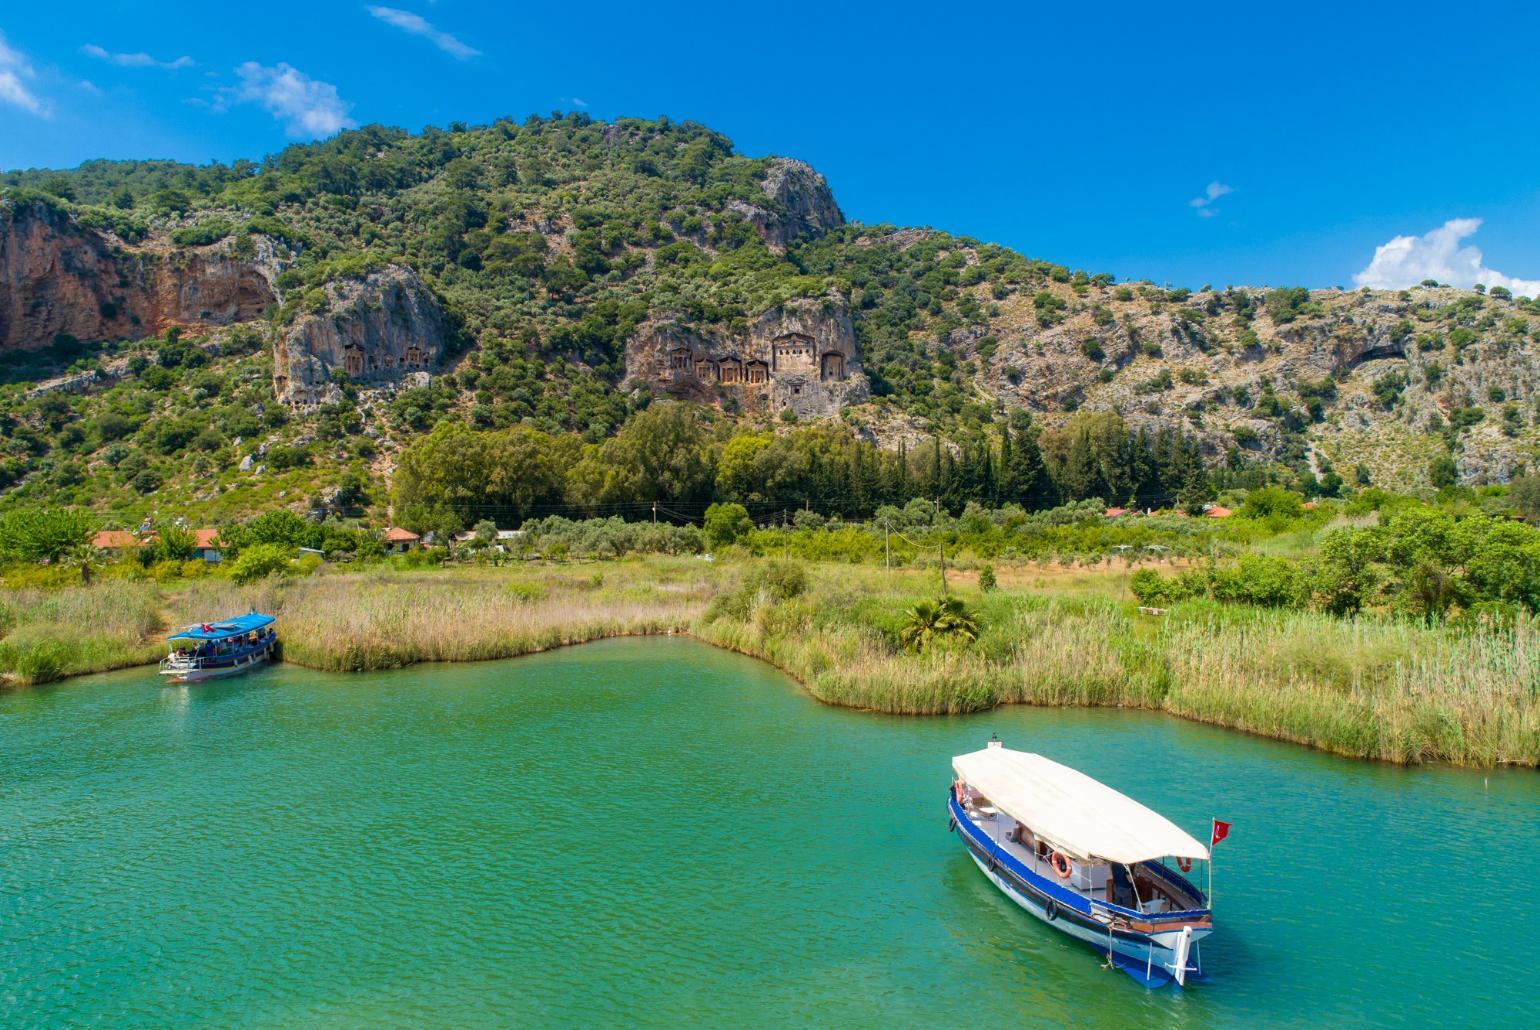 View of ancient Lycian rock tombs from the Dalyan river